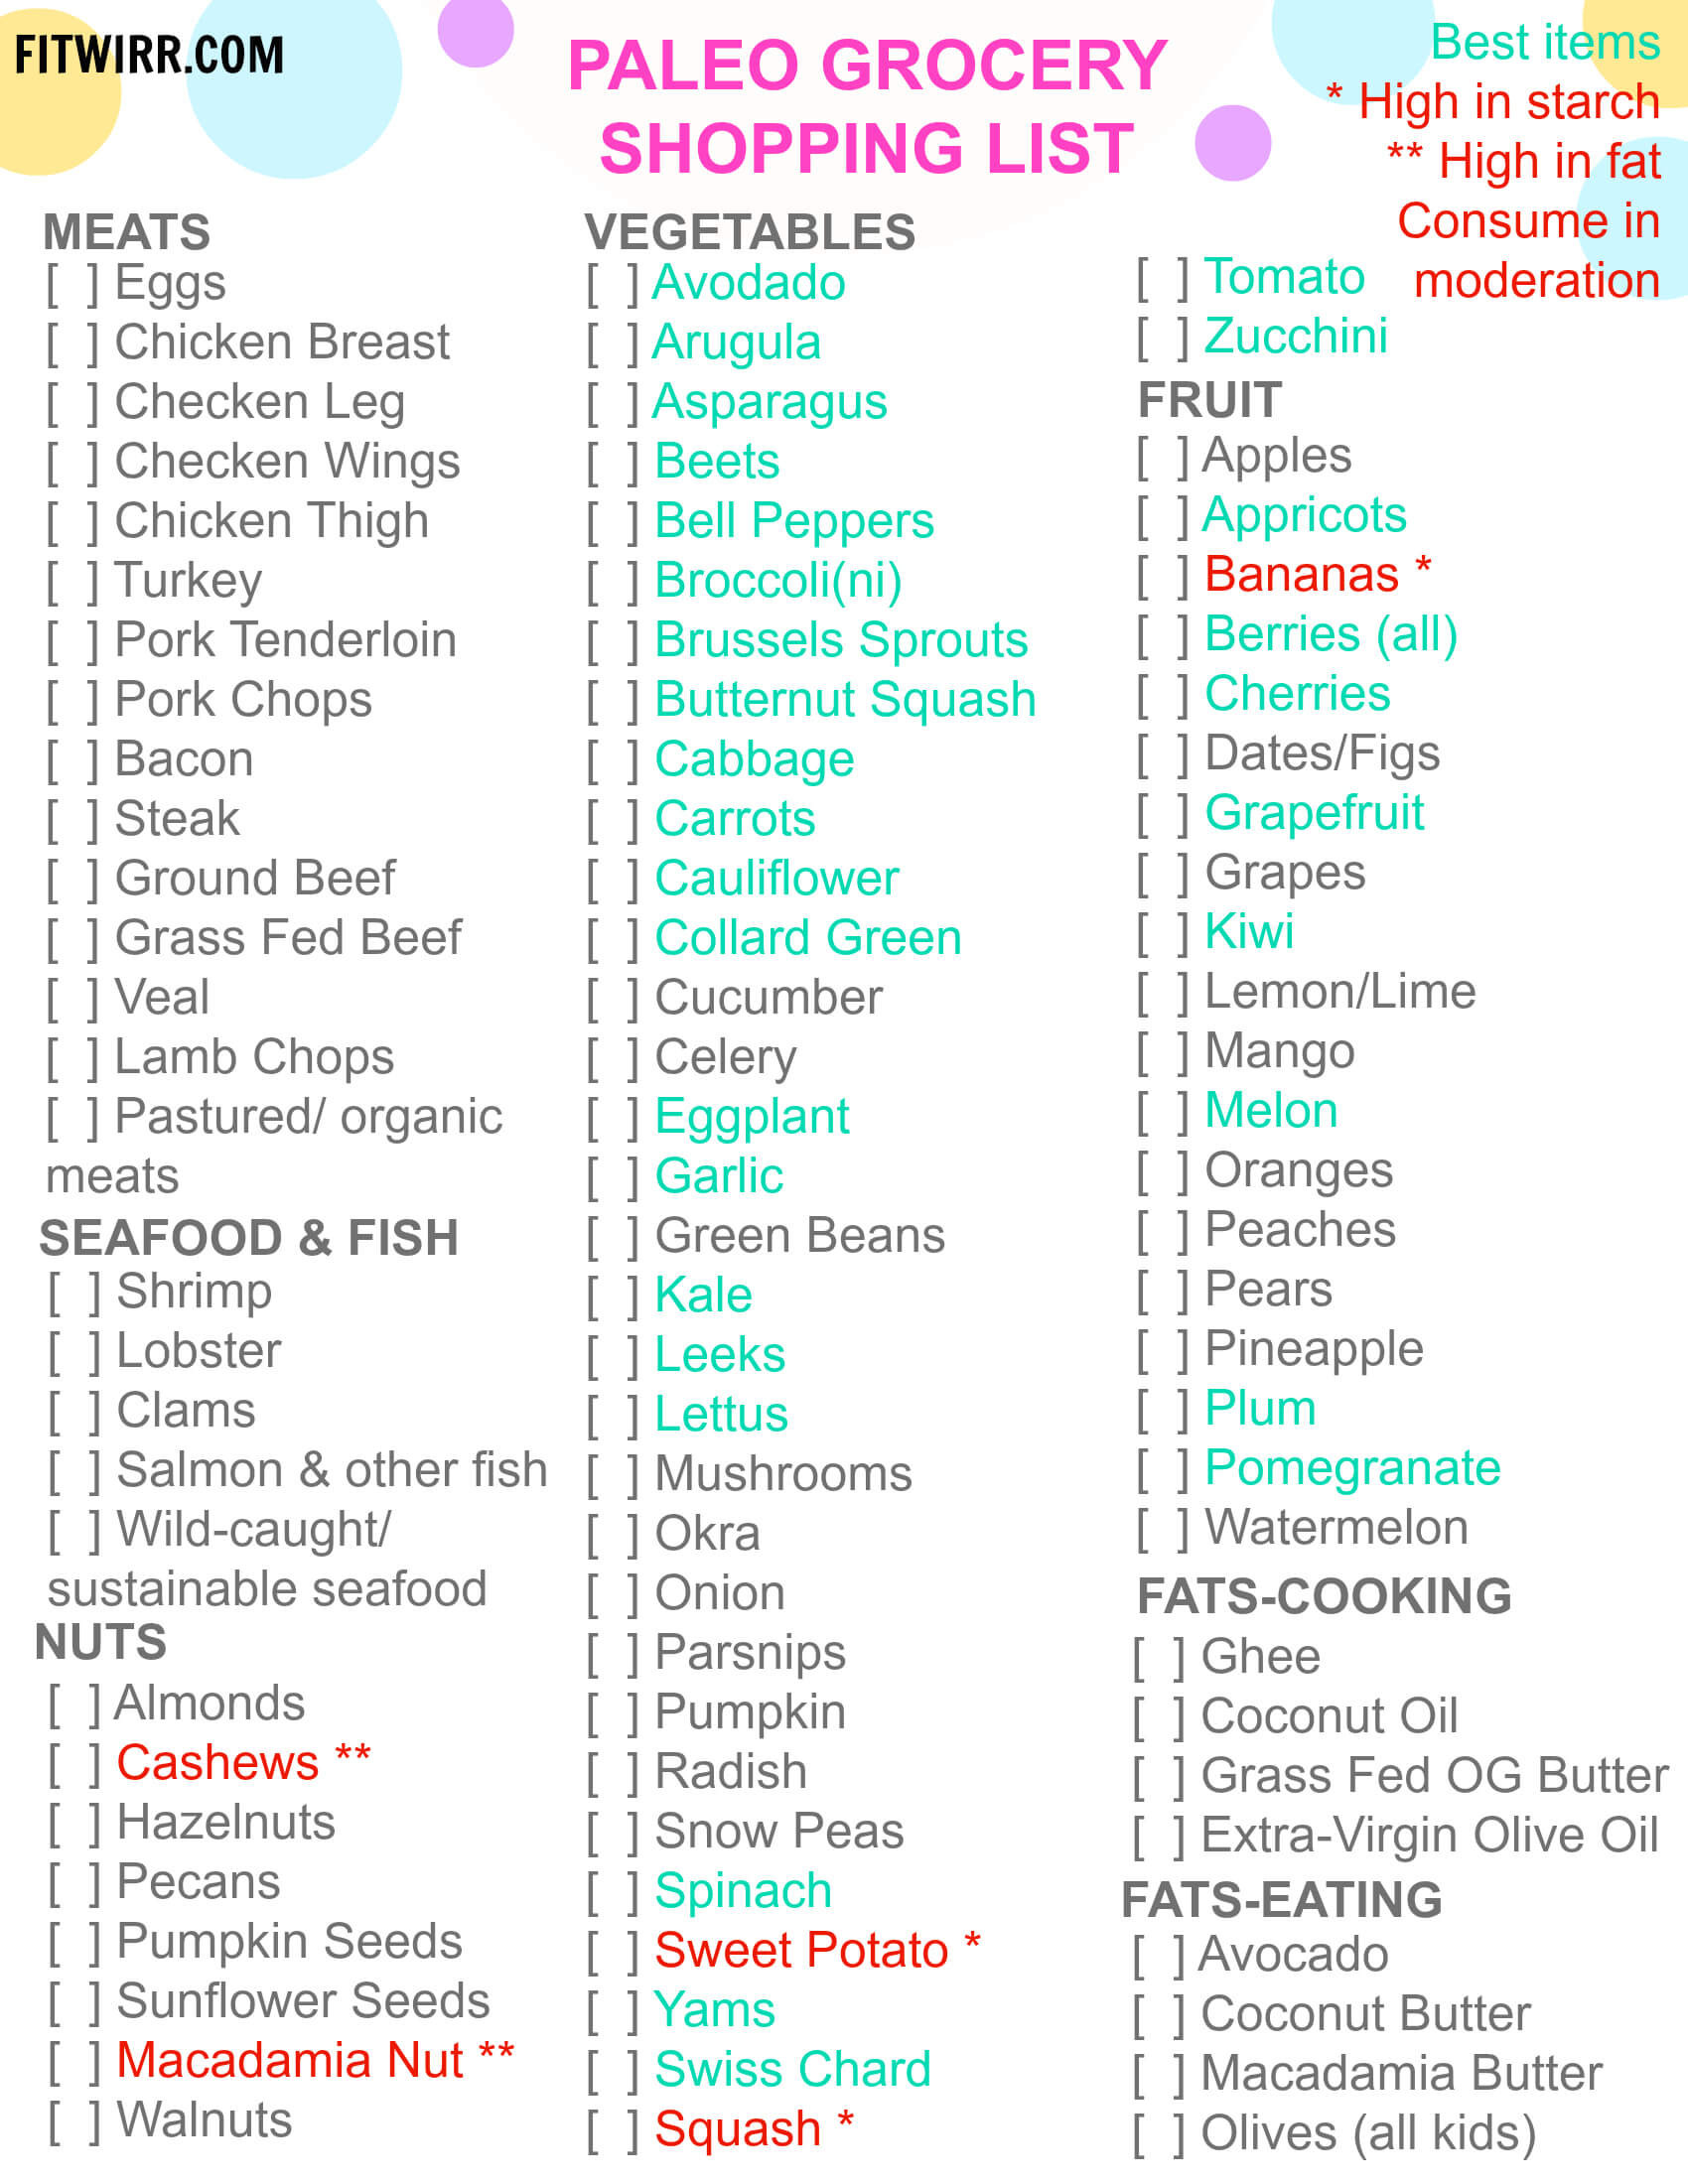 Paleo Diet Shopping List
 Paleo Diet Food List What to Eat and Not to Eat